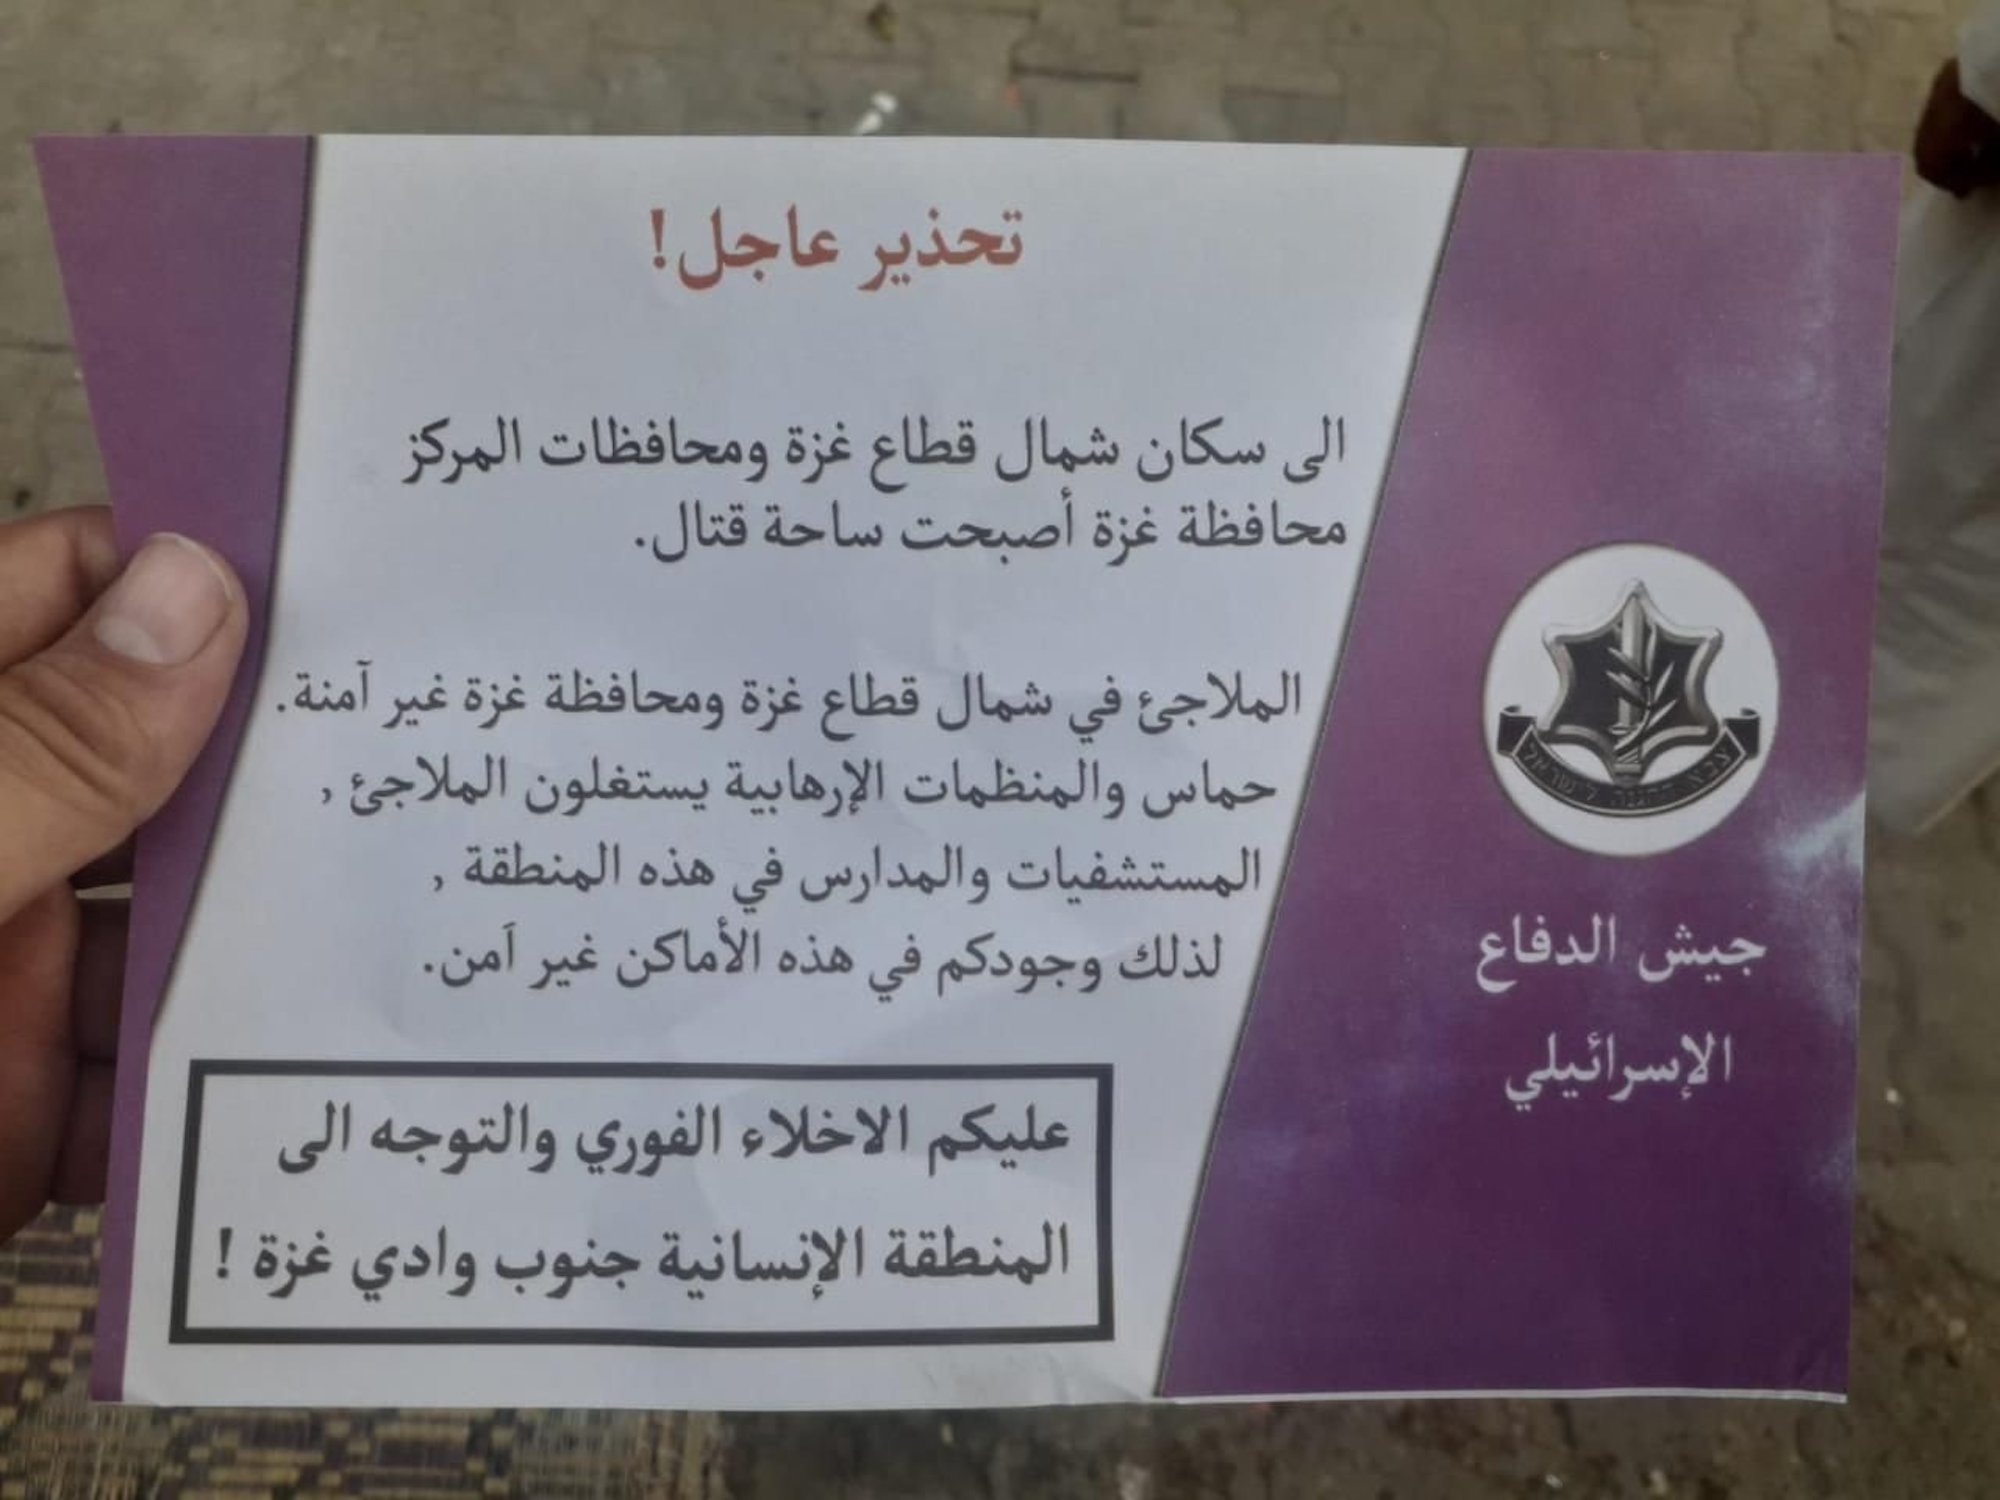 An IDF leaflet dropped in Gaza warning civilians to evacuate is seen on Monday.